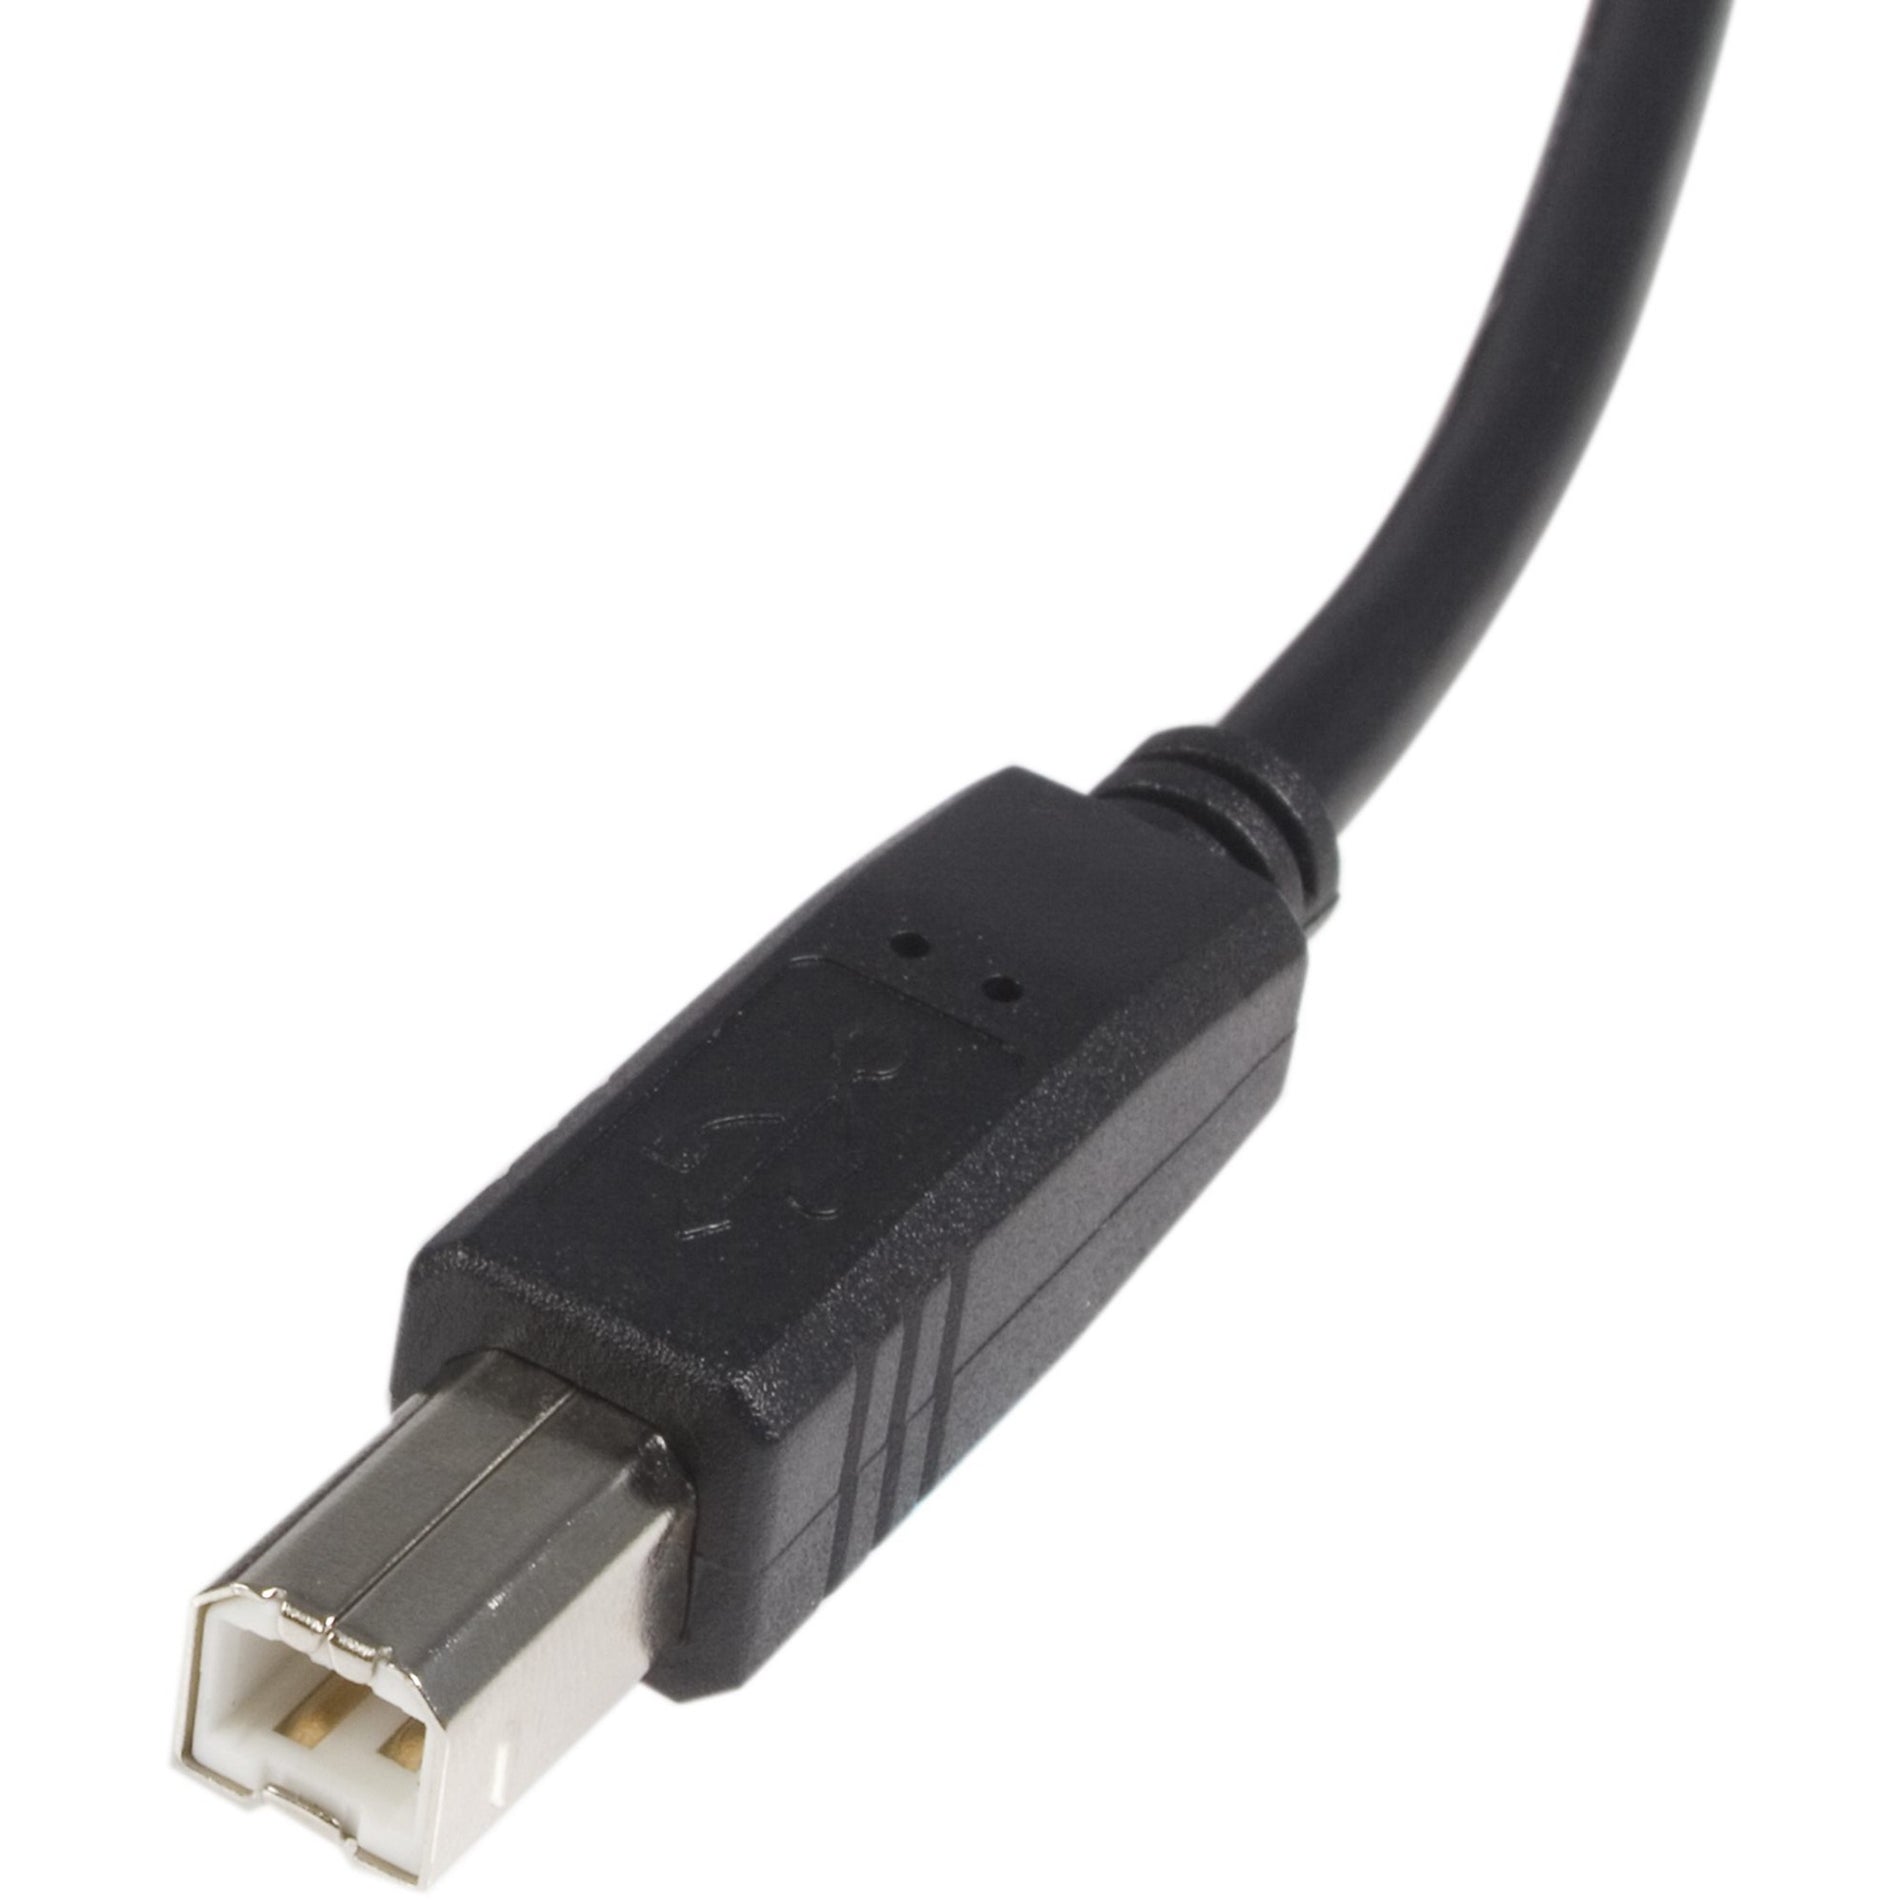 StarTech.com USB2HAB1 1 ft USB 2.0 A to B Cable - M/M, High-Speed Data Transfer, Copper Conductor, 480 Mbit/s Data Transfer Rate, Black